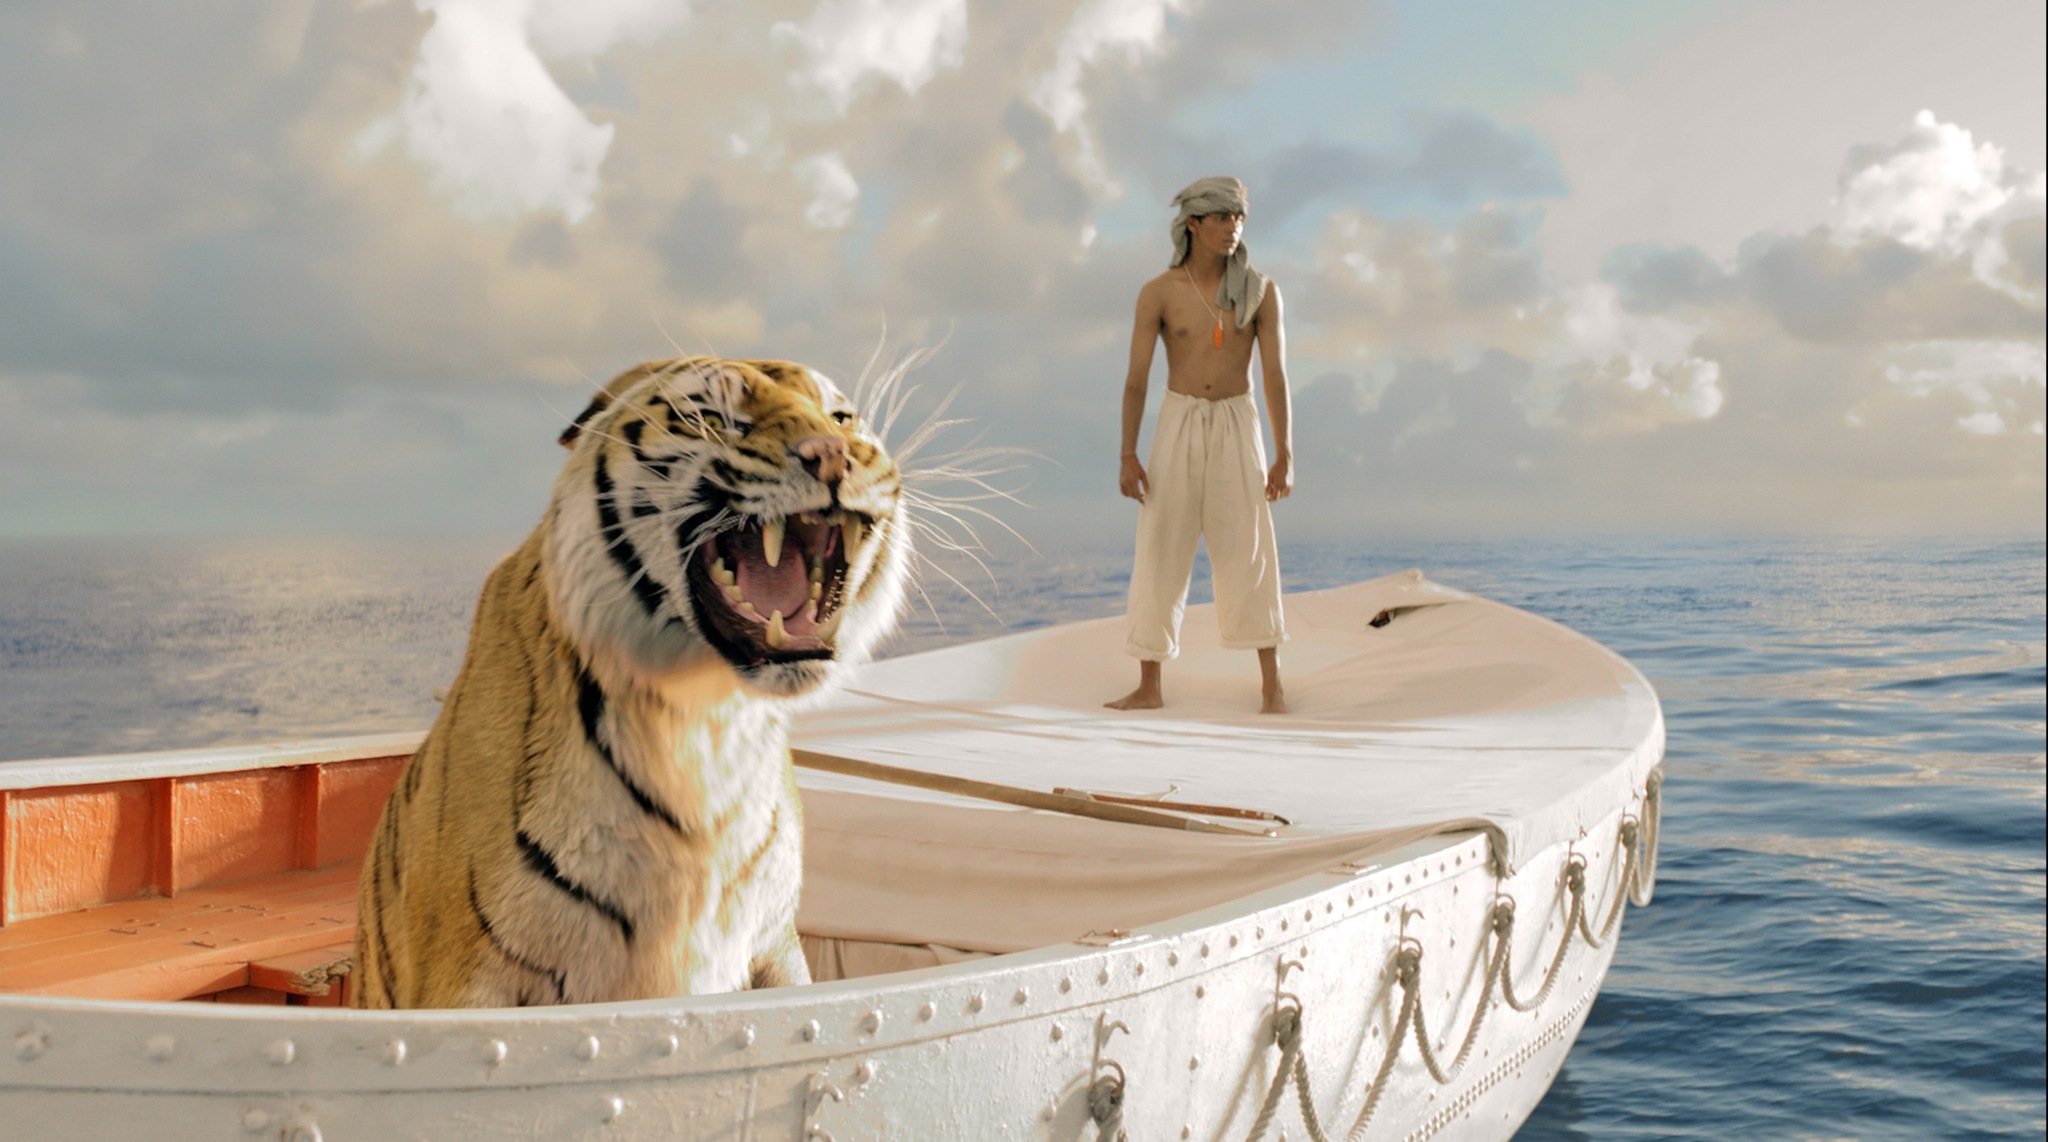 the life of pi